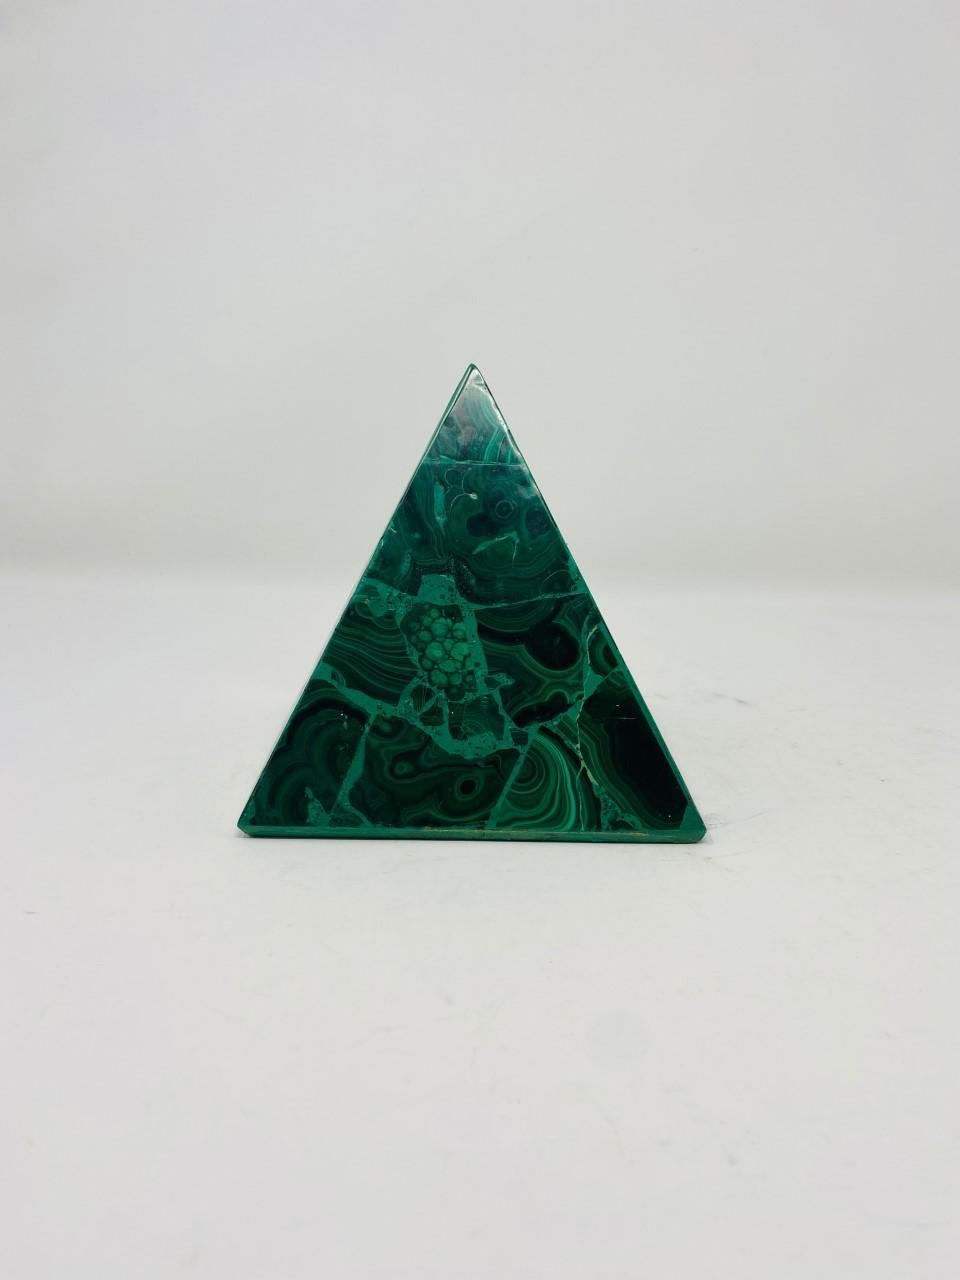 Striking green malachite paneled veneer pyramid. This beautiful and interesting vintage piece will add style to your décor. Whether a Mid Century purist or a stylish addition to your eclectic décor, this beautiful pyramid piece will add style and